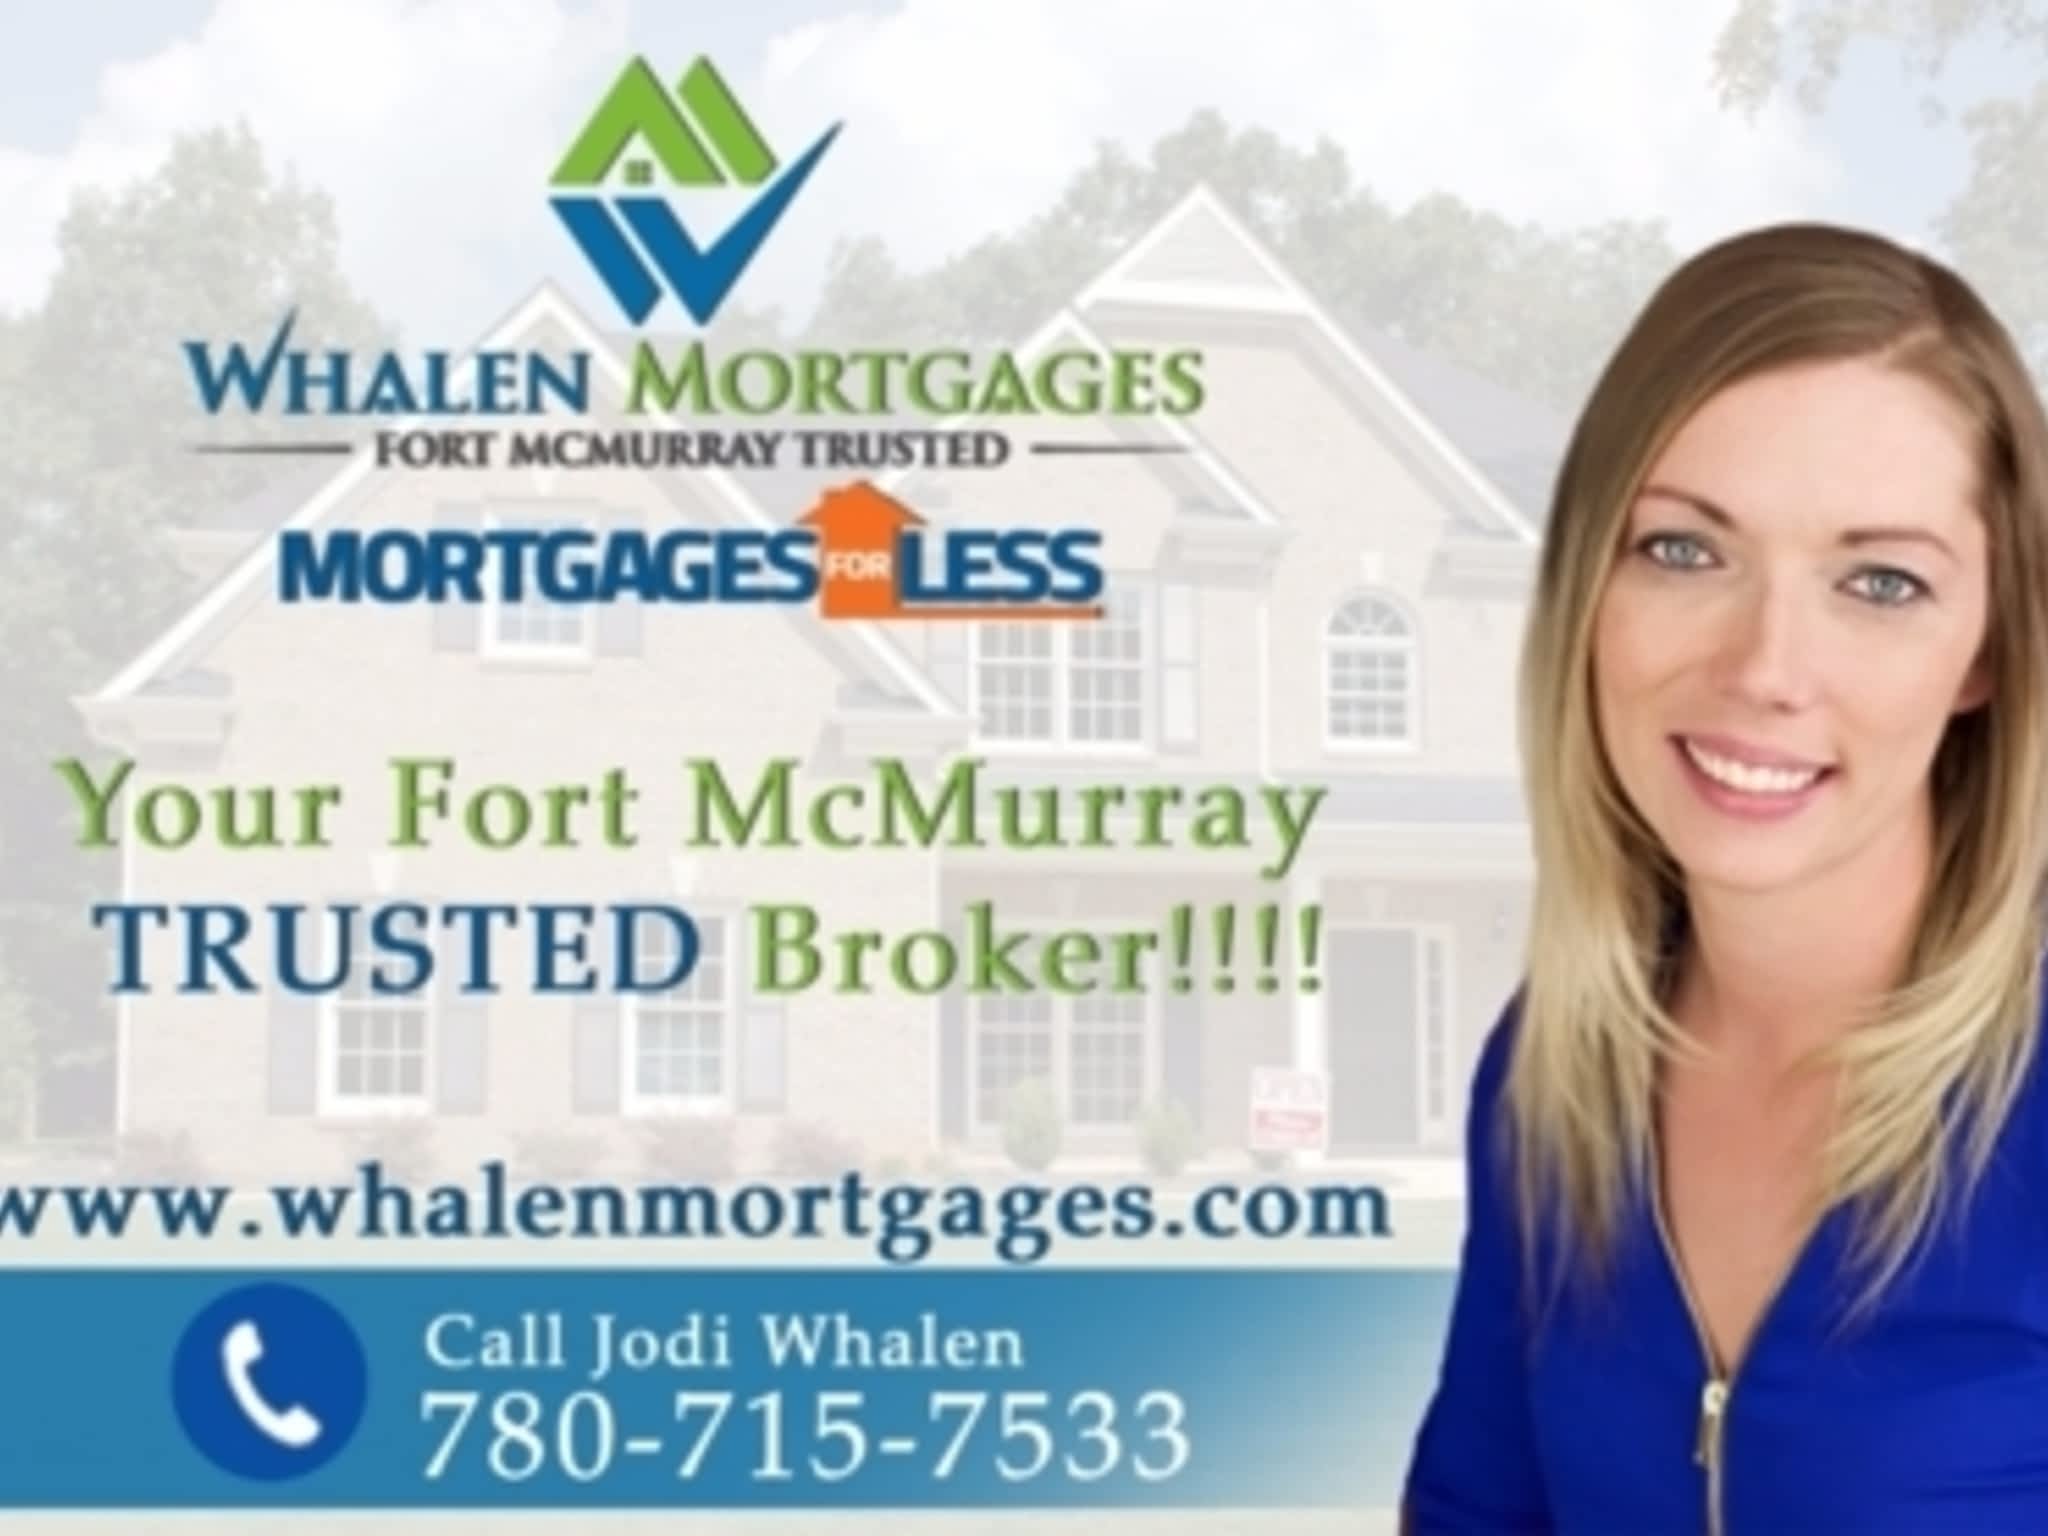 photo Whalen Mortgages - Fort McMurray Mortgage Broker